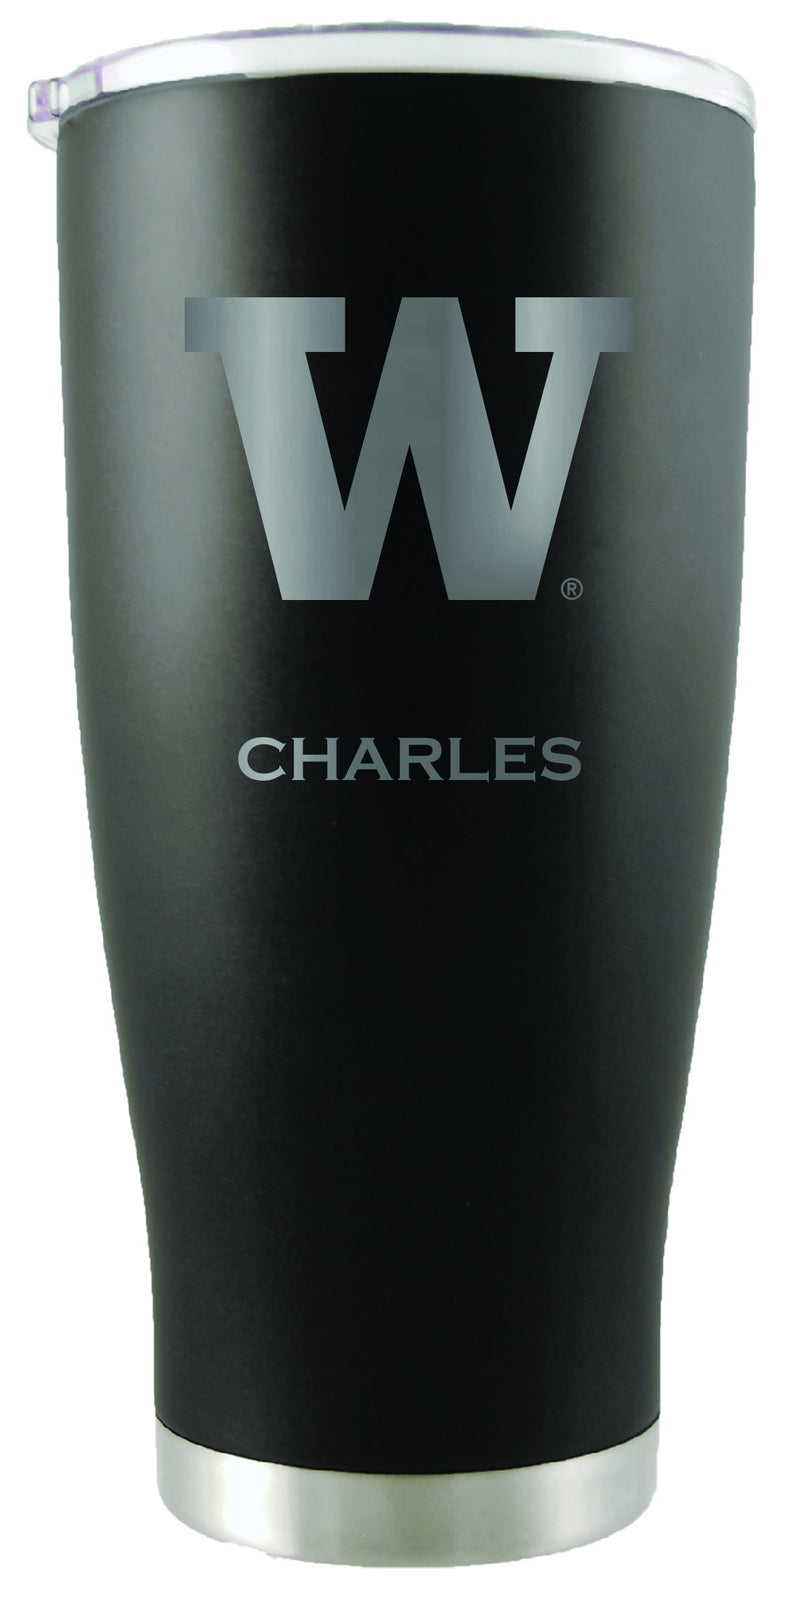 20oz Black Personalized Stainless Steel Tumbler | Washington
COL, CurrentProduct, Drinkware_category_All, Personalized_Personalized, UWA, Washington Huskies
The Memory Company